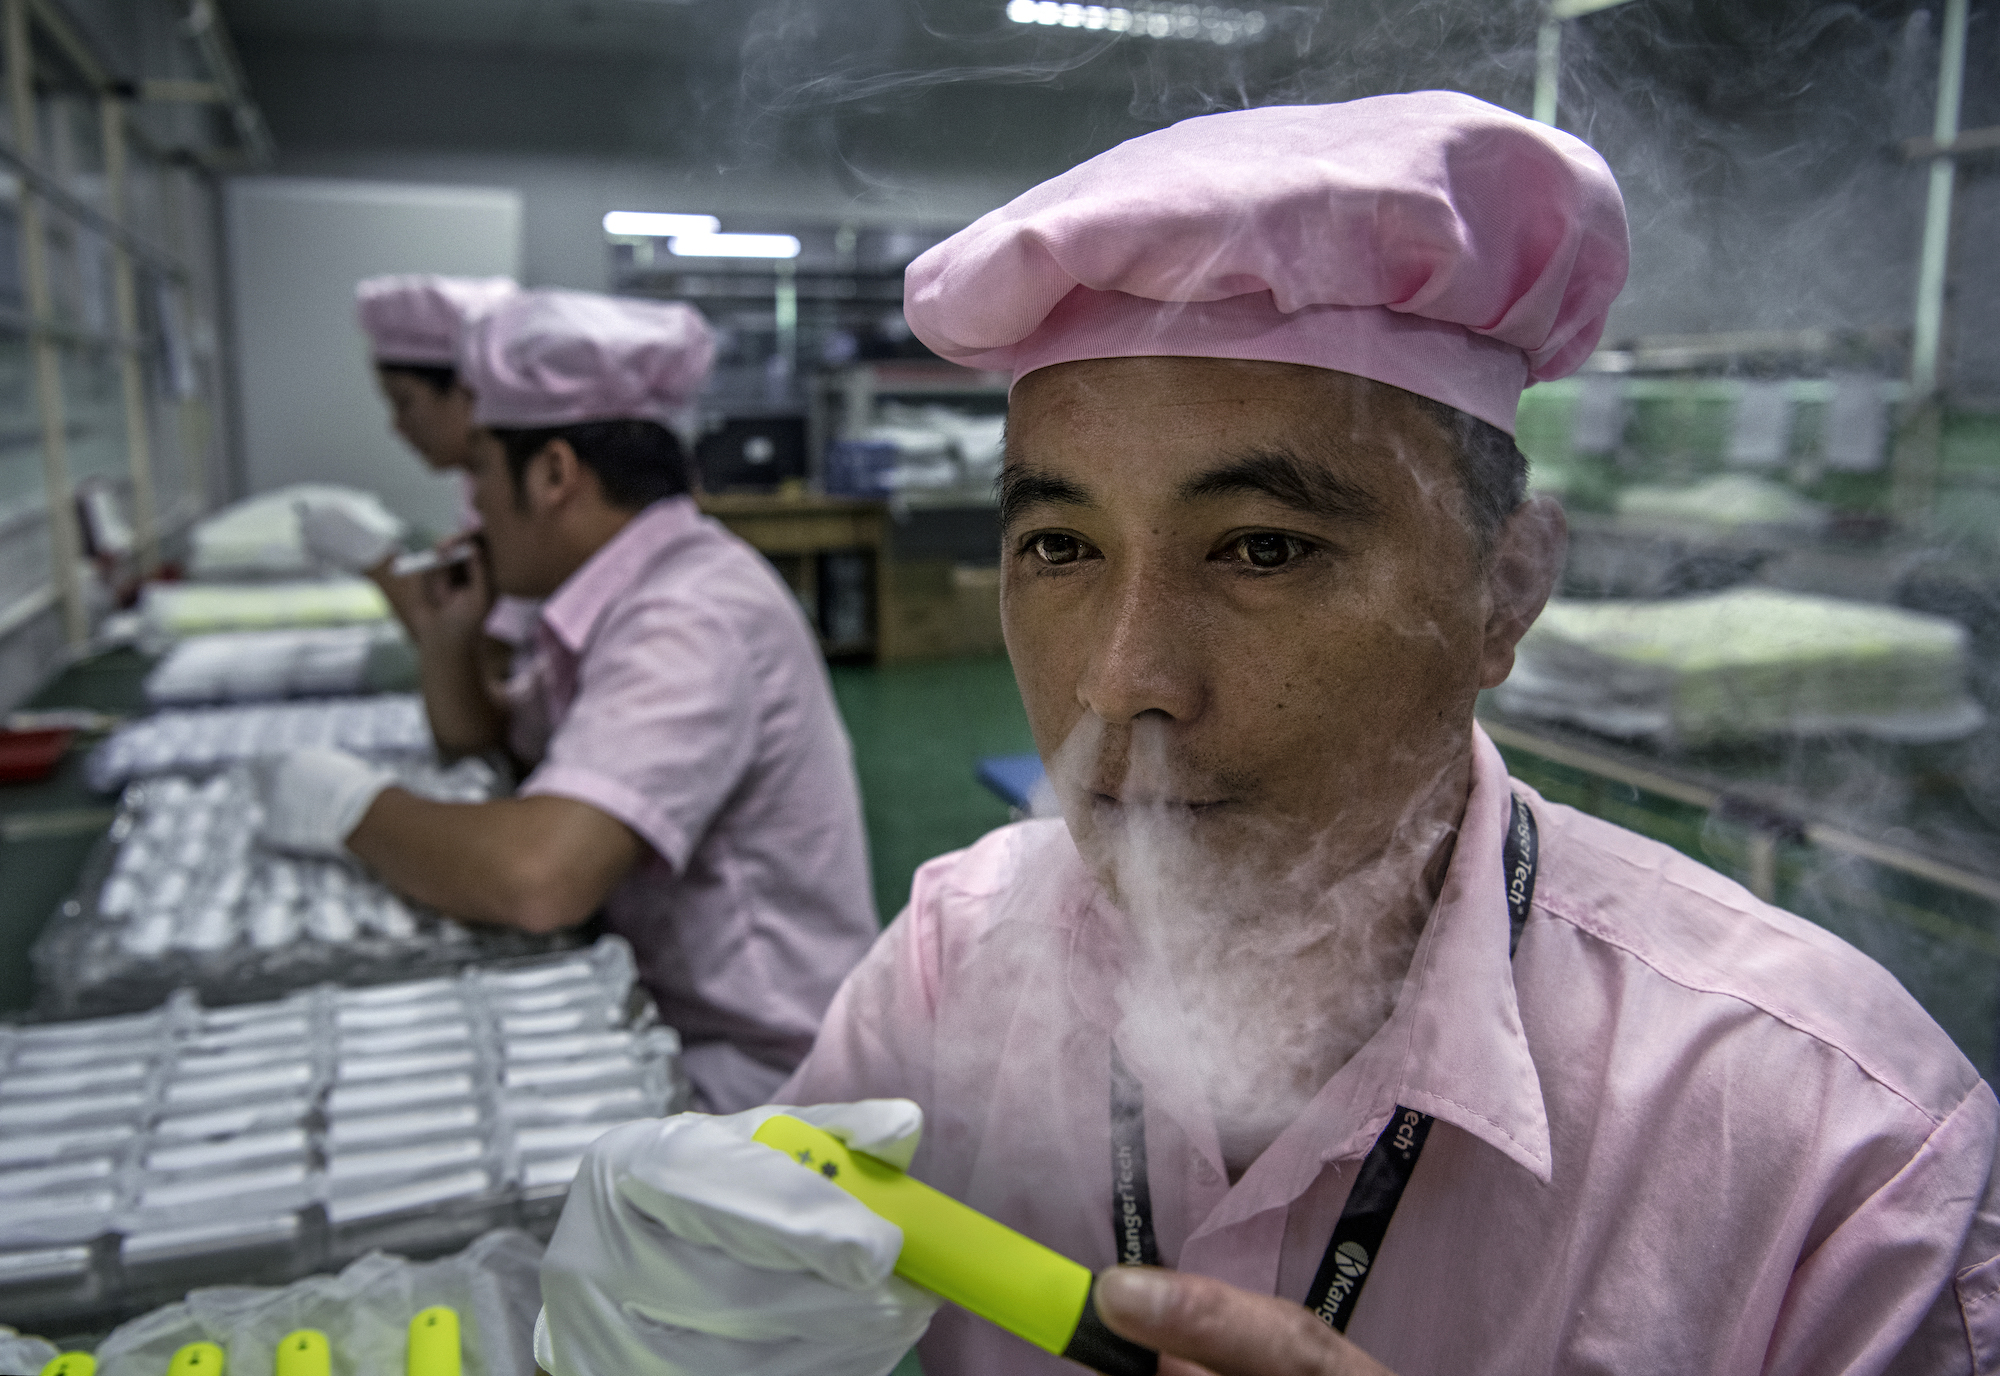 A worker in Vape Valley, Shenzhen tries out a product